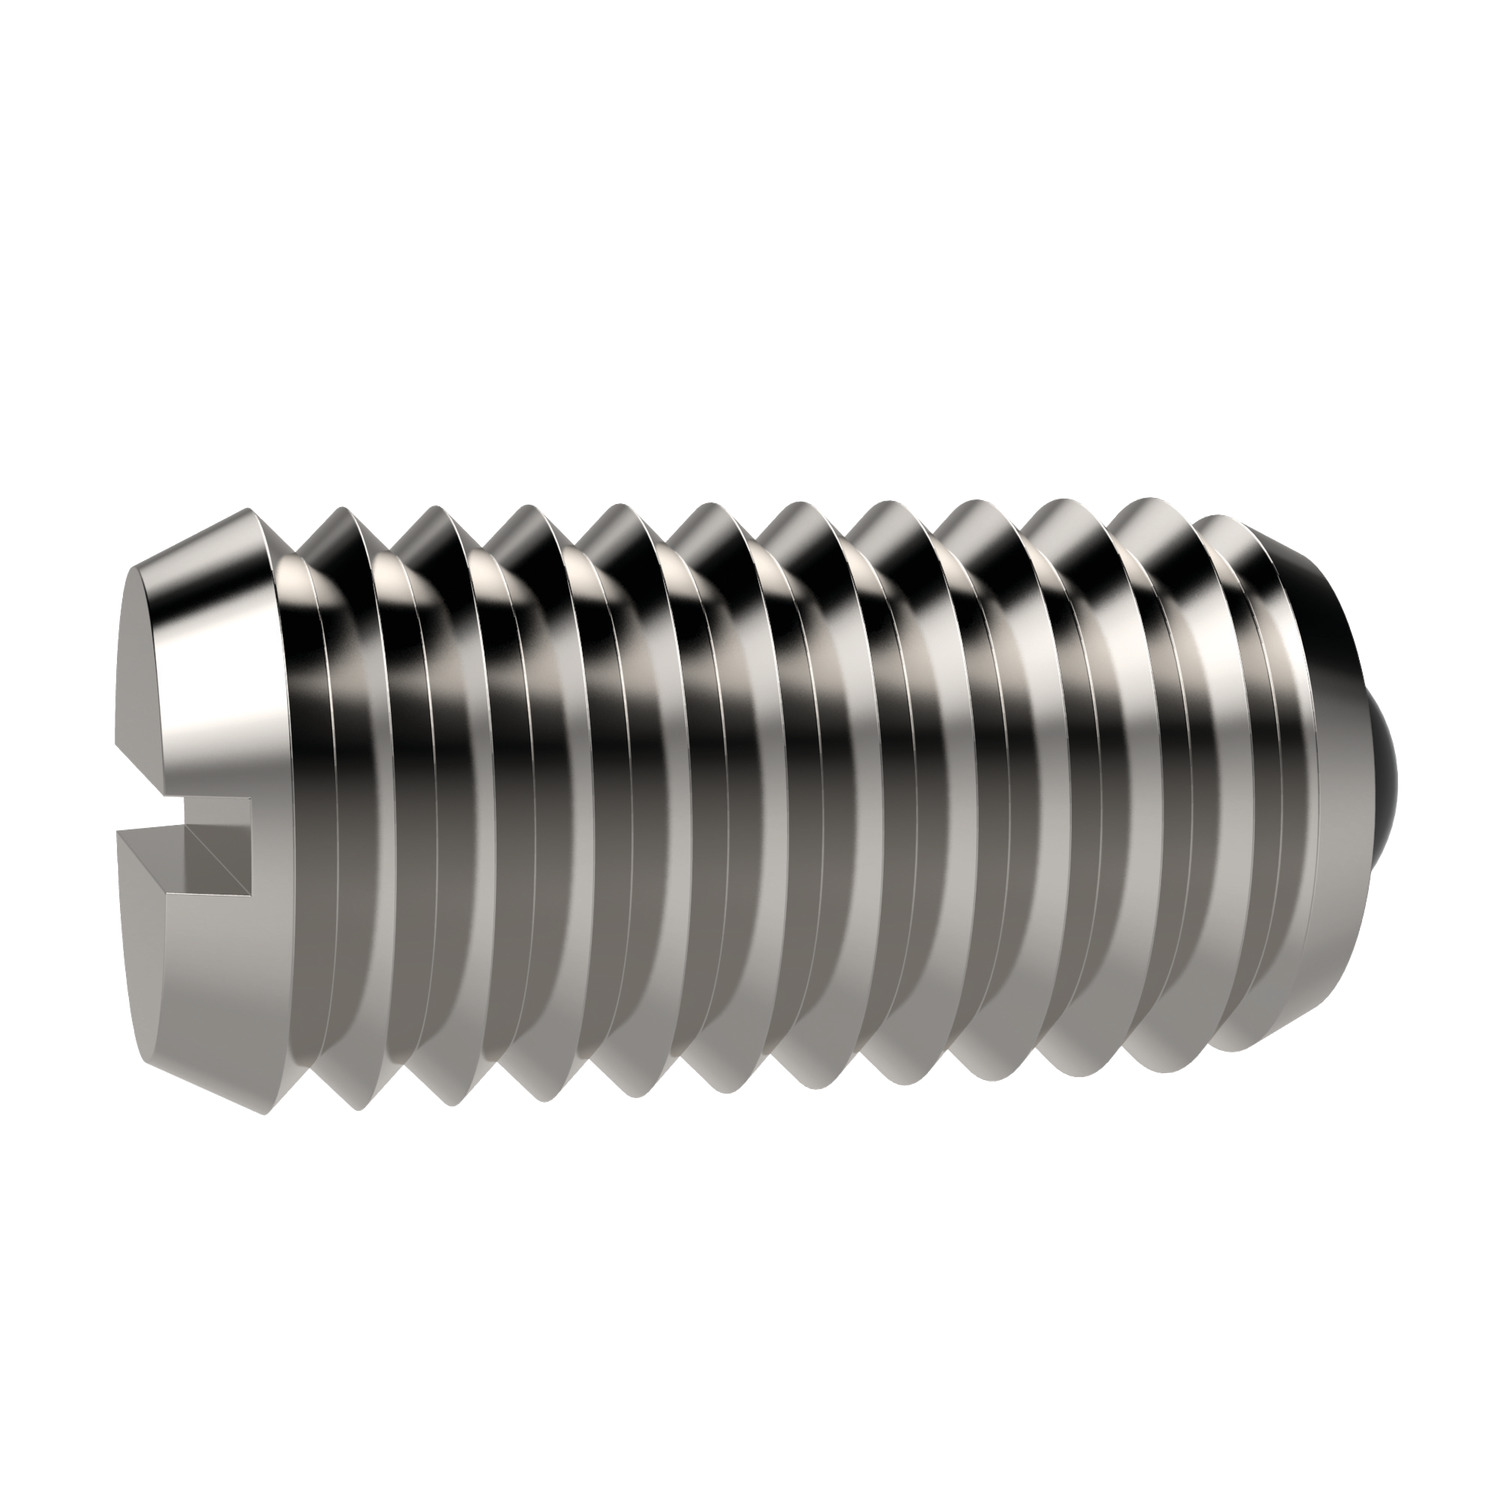 Spring Plunger Spring plunger with slot and ceramic ball, manufactured in 316 stainless steel for greater corrosion resistance.